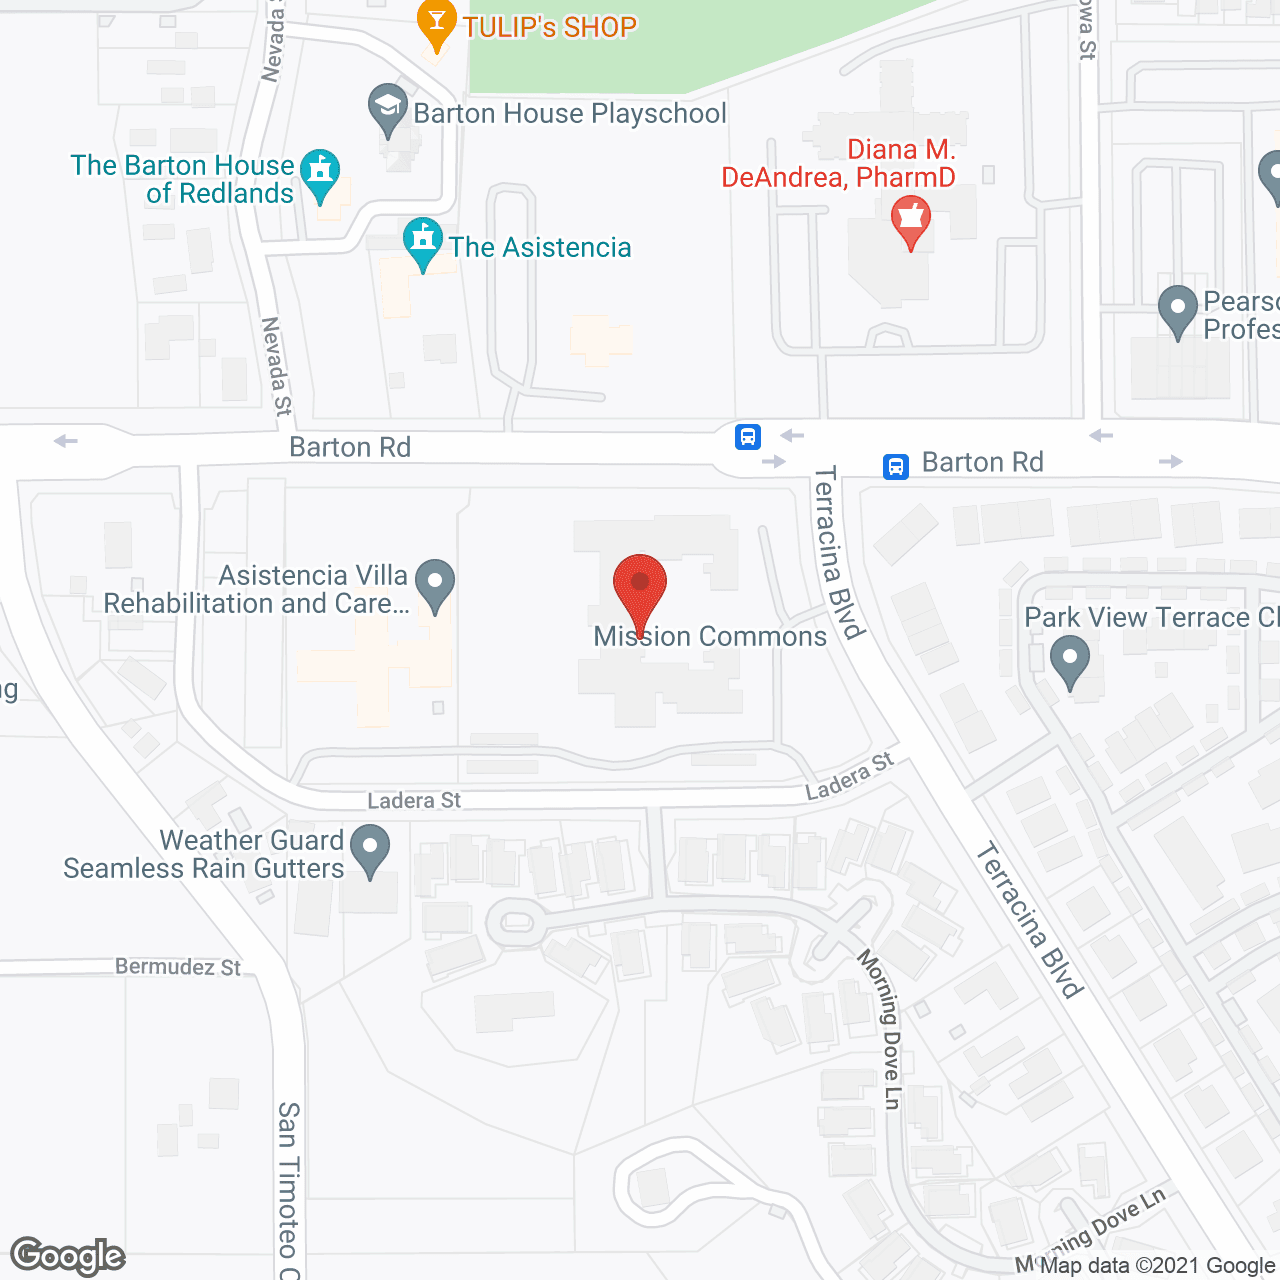 Holiday Mission Commons in google map